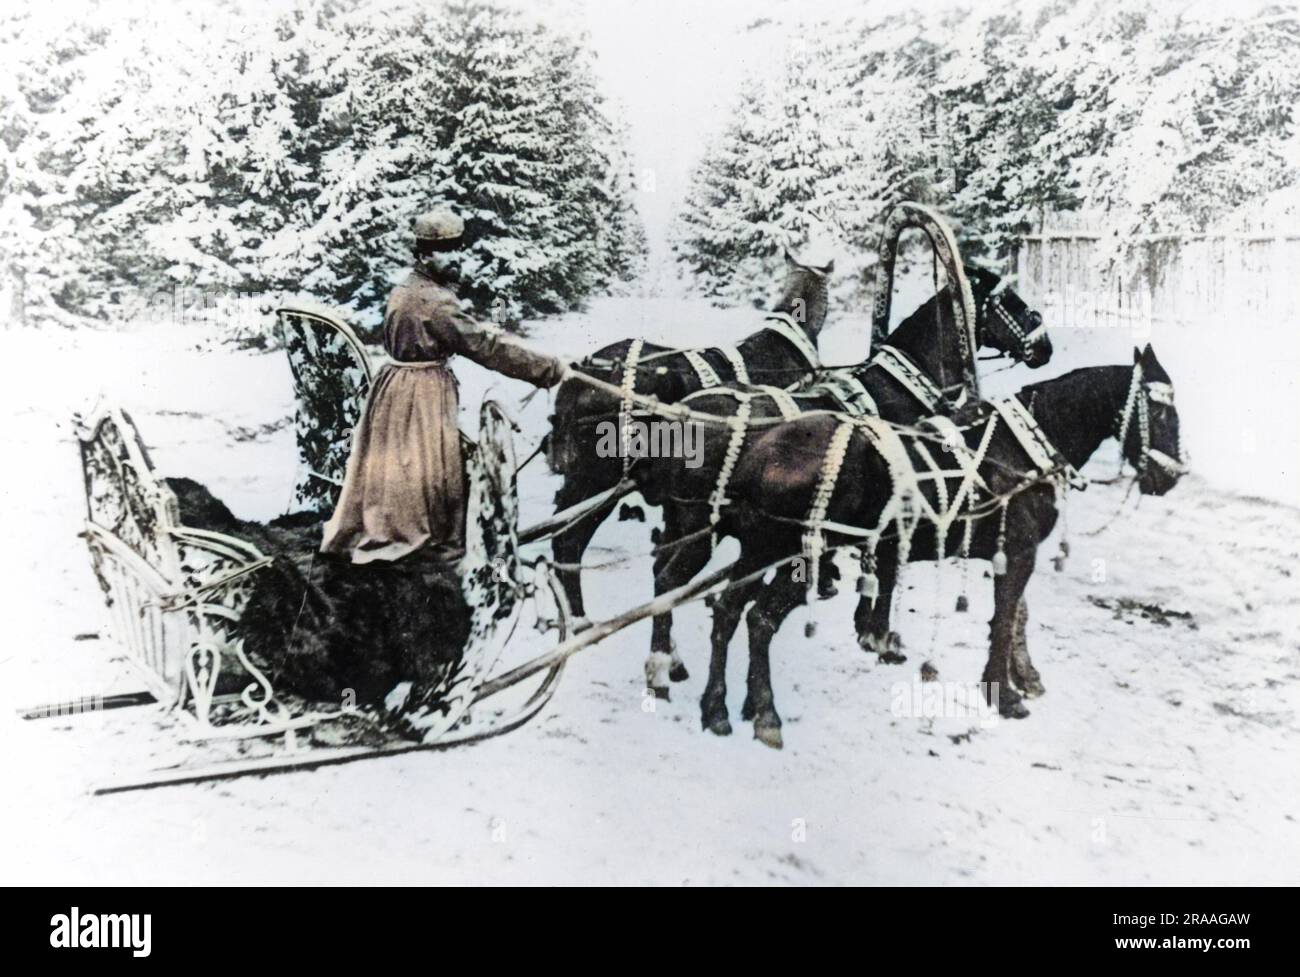 A late 19th century decorative Russian Horse Drawn sledge called a Trioka. Troika is the Russian word for 'triplet' or 'trio' this being reference to the fact that troikas have three harnesses as they are pulled by three horses.     Date: Late 19th century Stock Photo